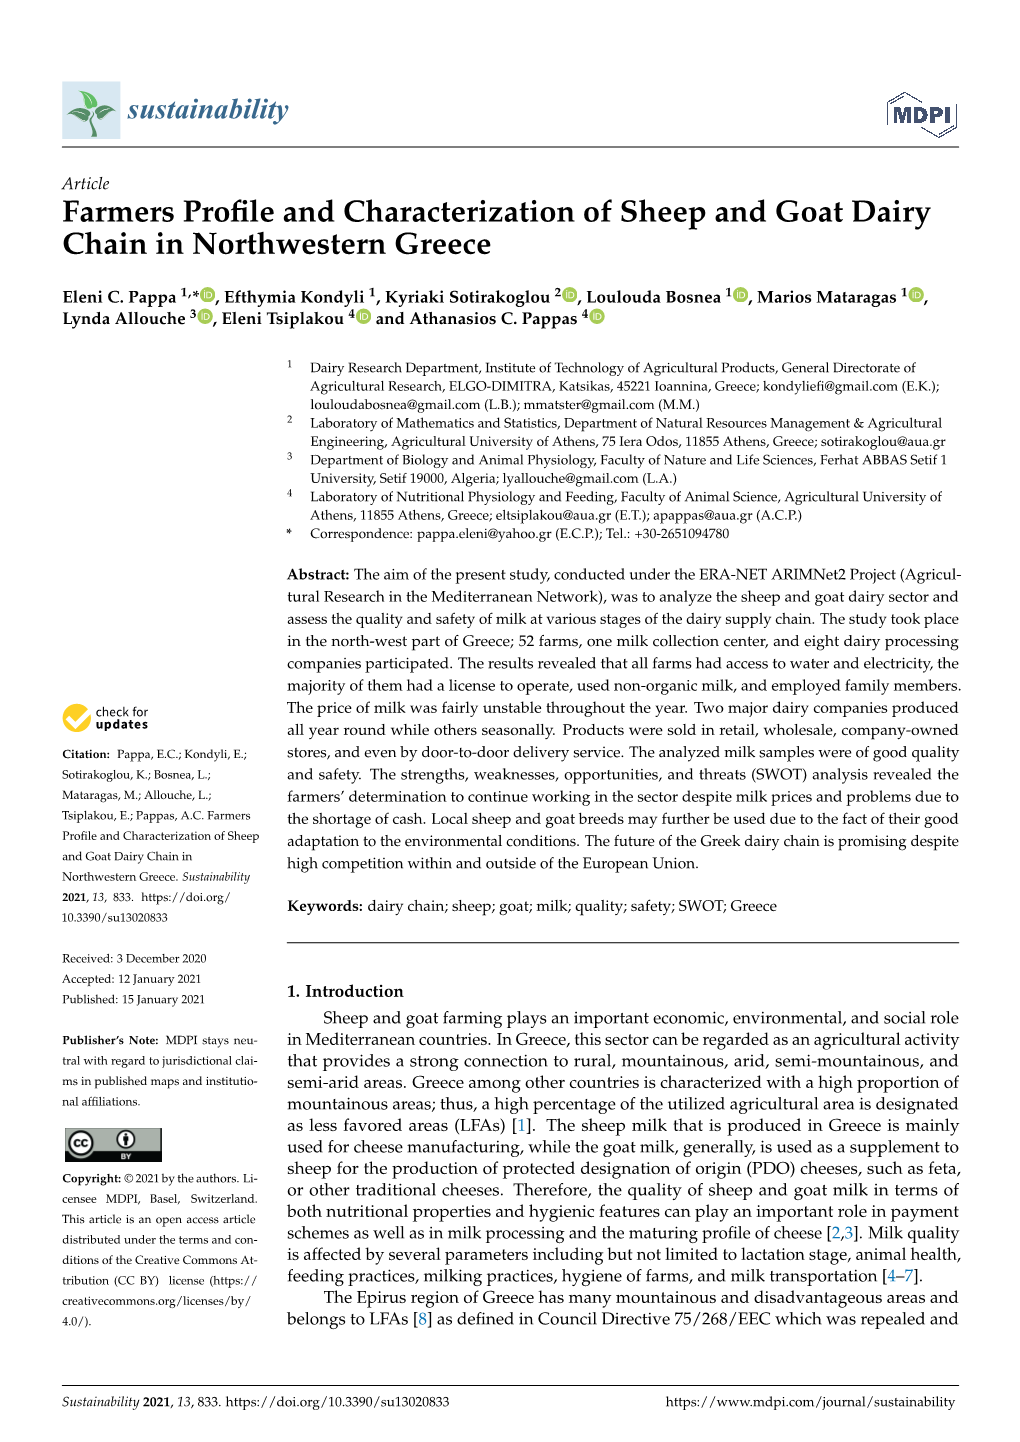 Farmers Profile and Characterization of Sheep and Goat Dairy Chain in Northwestern Greece